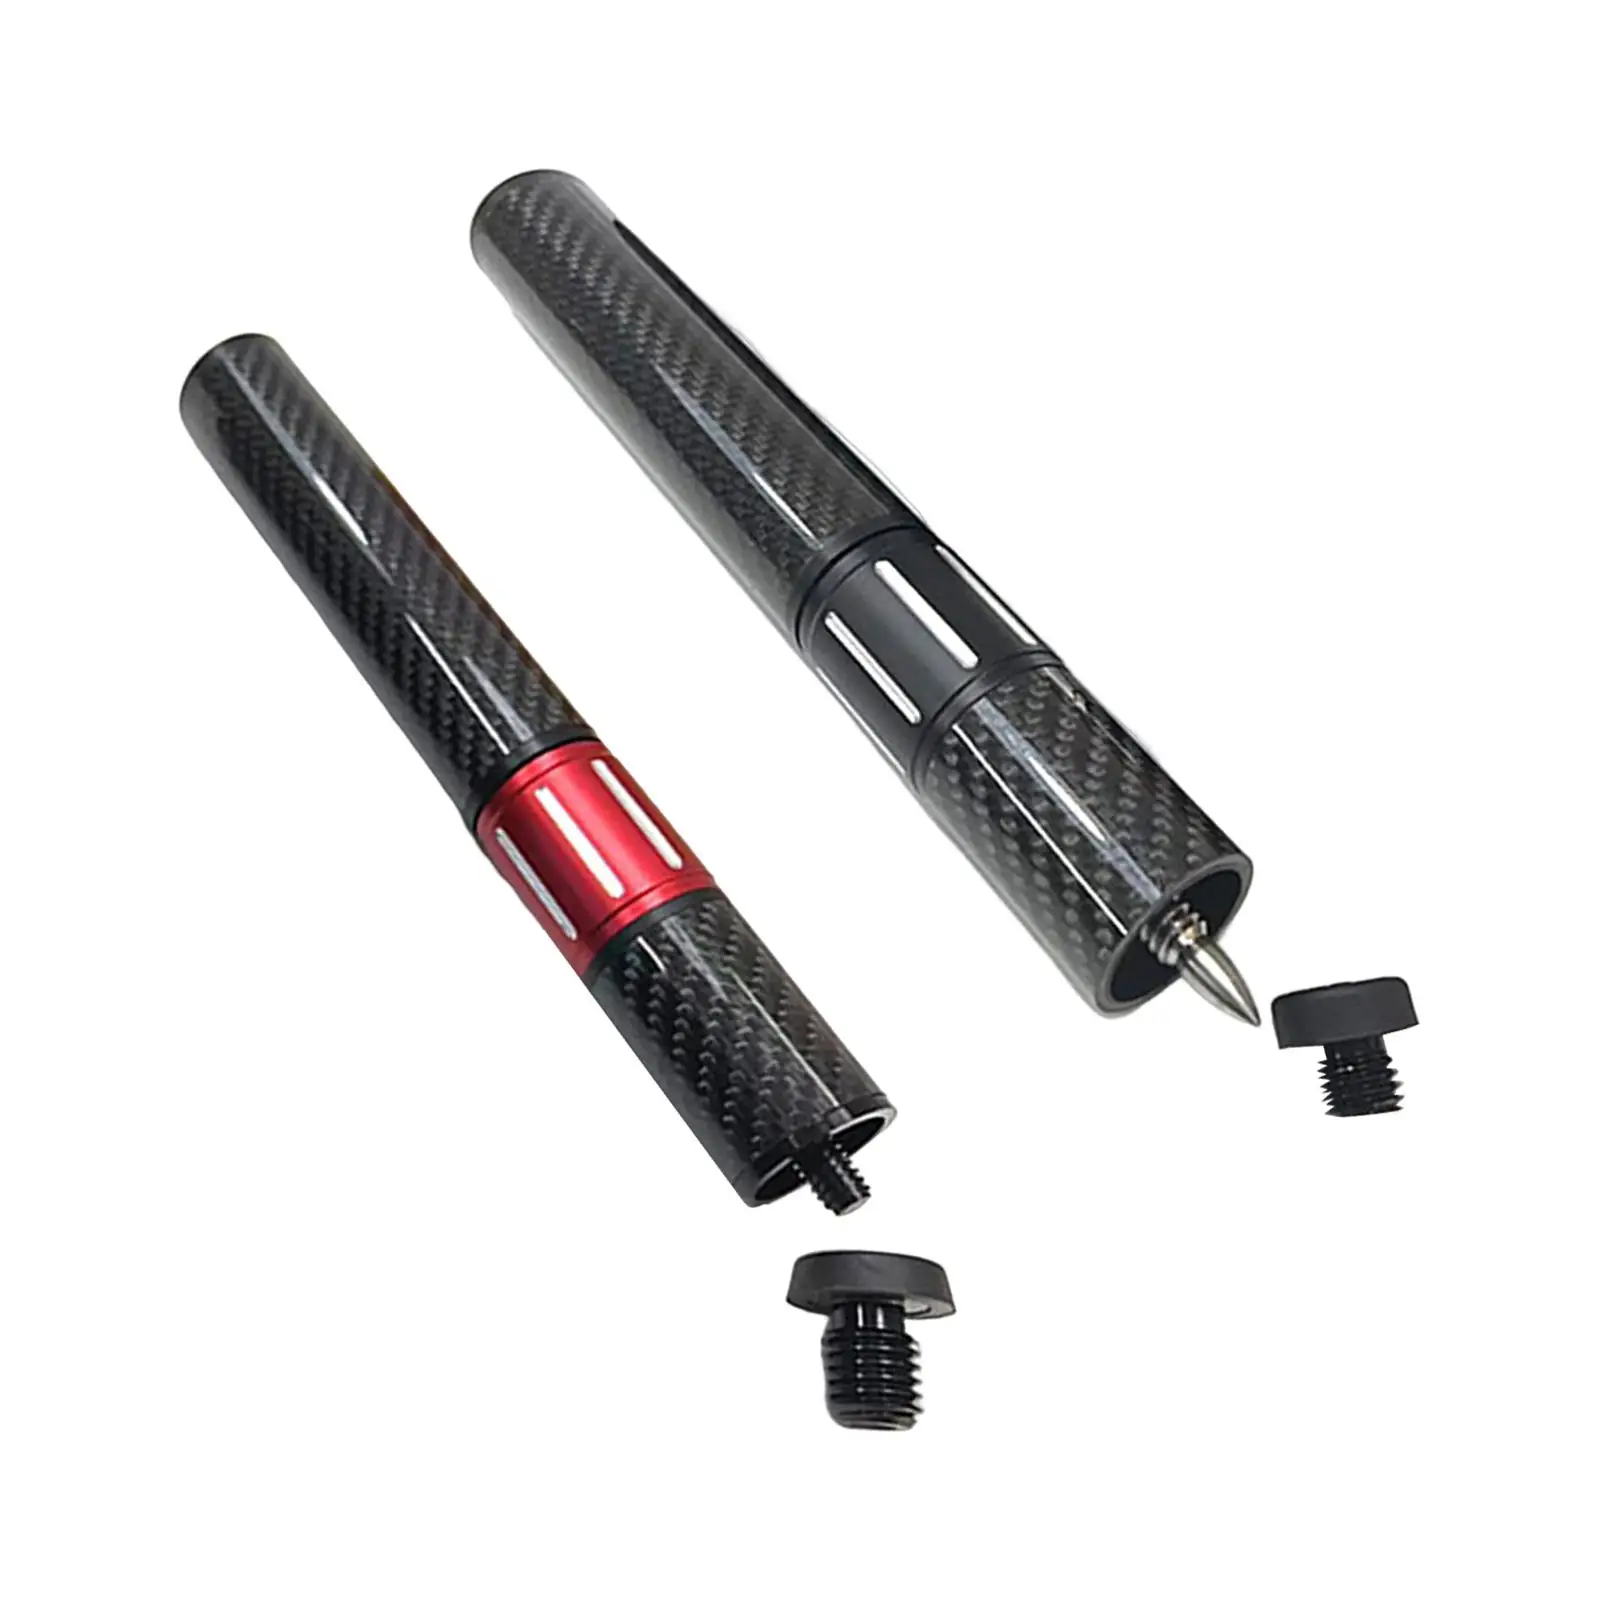 Snooker Cue Extend Lightweight Telescopic Pool Cue Extension Weights Replacement for Billiard Cues Beginners Professional